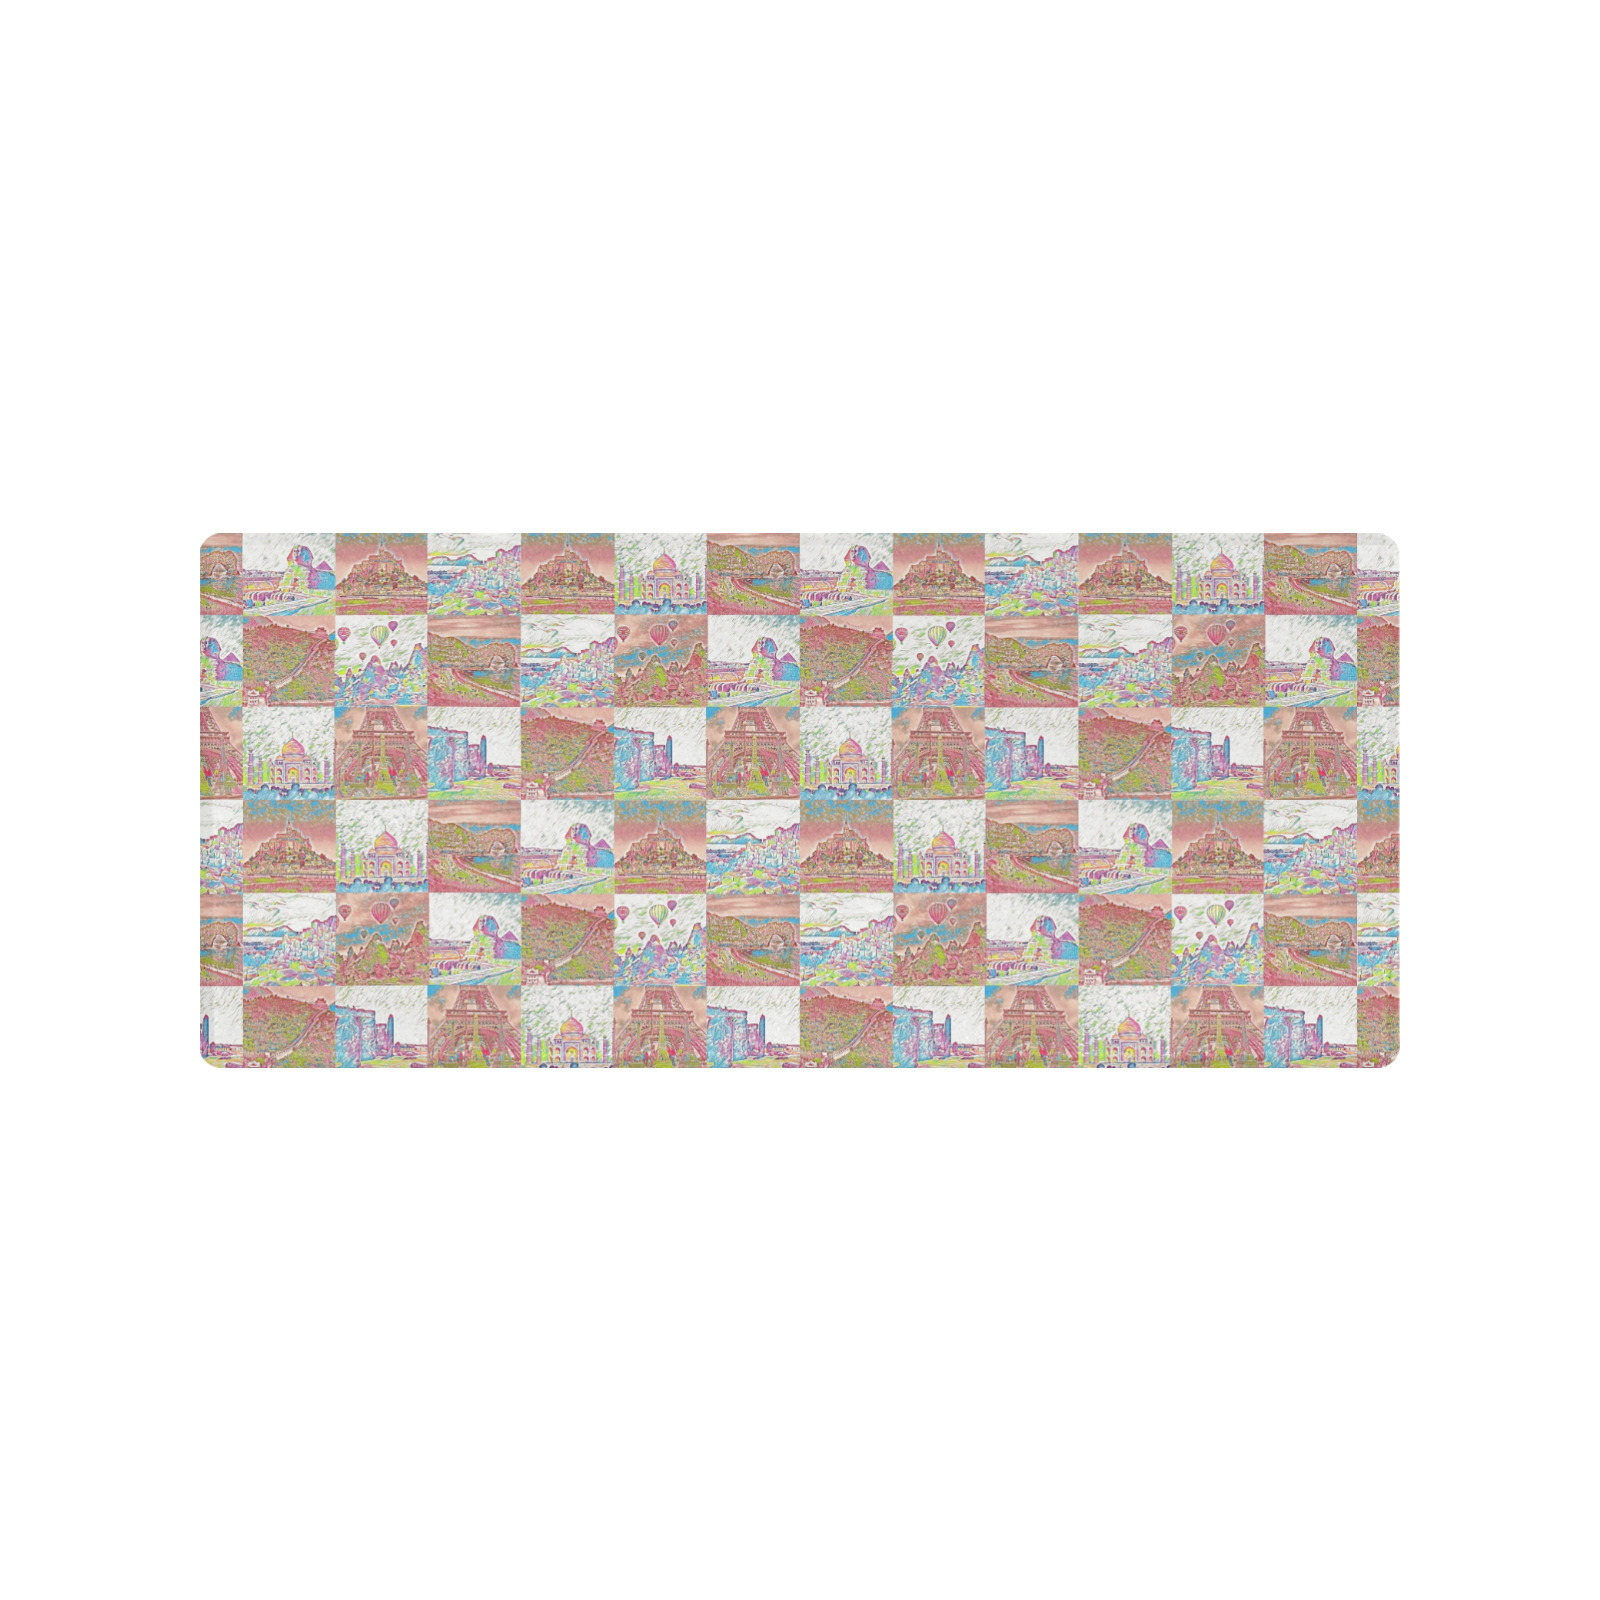 Big Pink and White World Travel Collage Pattern Gaming Mousepad (35"x16")